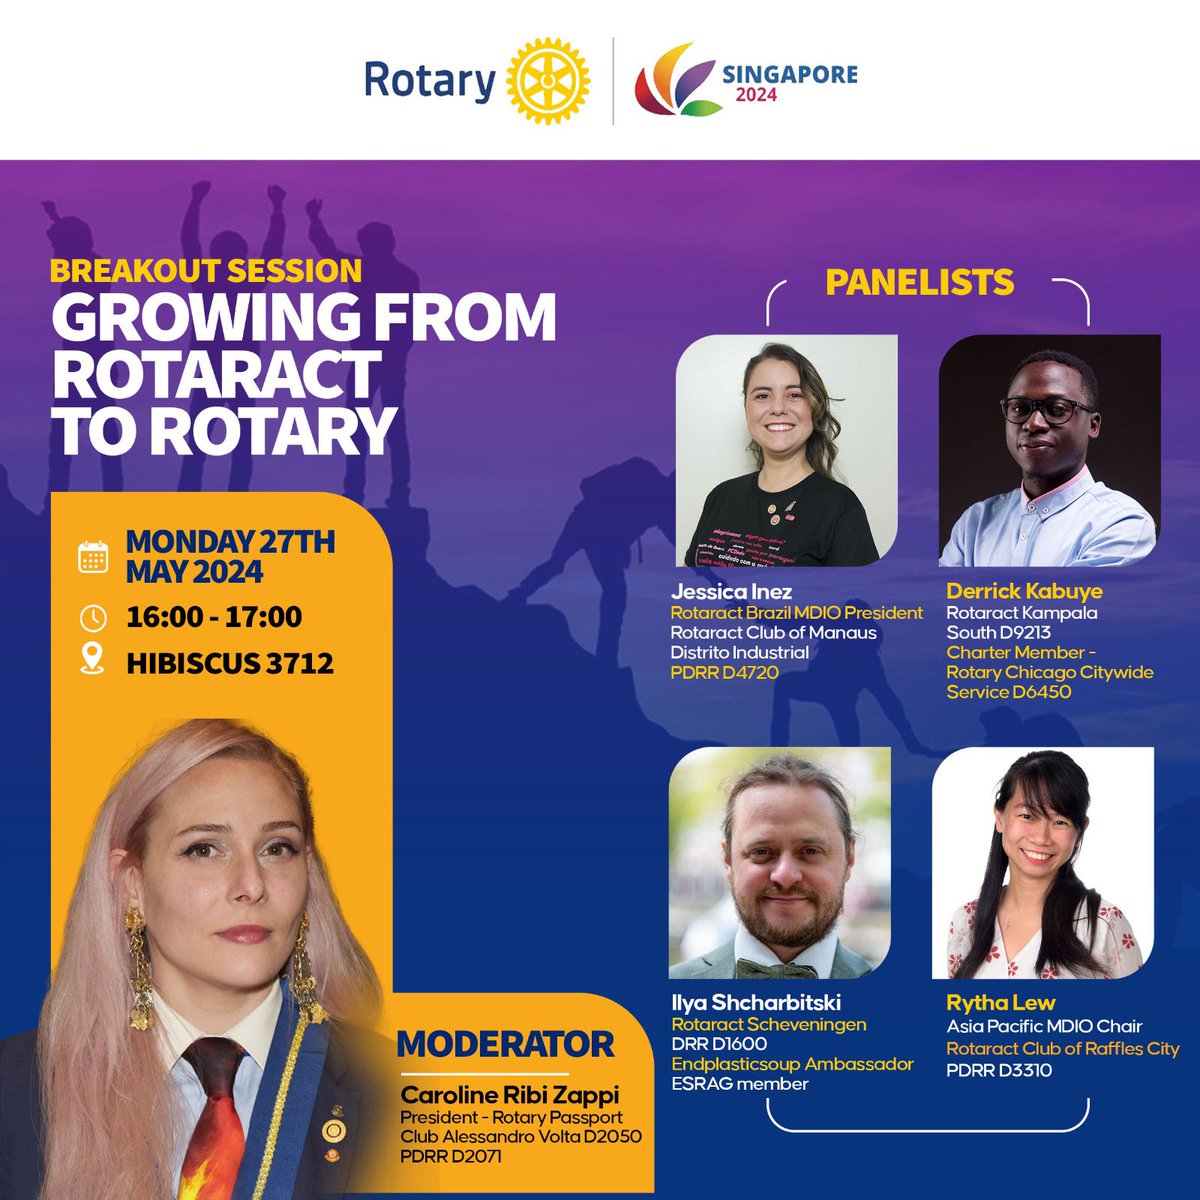 I’m excited to share that I’ll be speaking at the @Rotary International Convention in Singapore!
We will be talking about journeys of transition from Rotaract to Rotary, dual membership, sharing sucess stories, challenges, and the lessons we have learned along the way.
#Rotary24